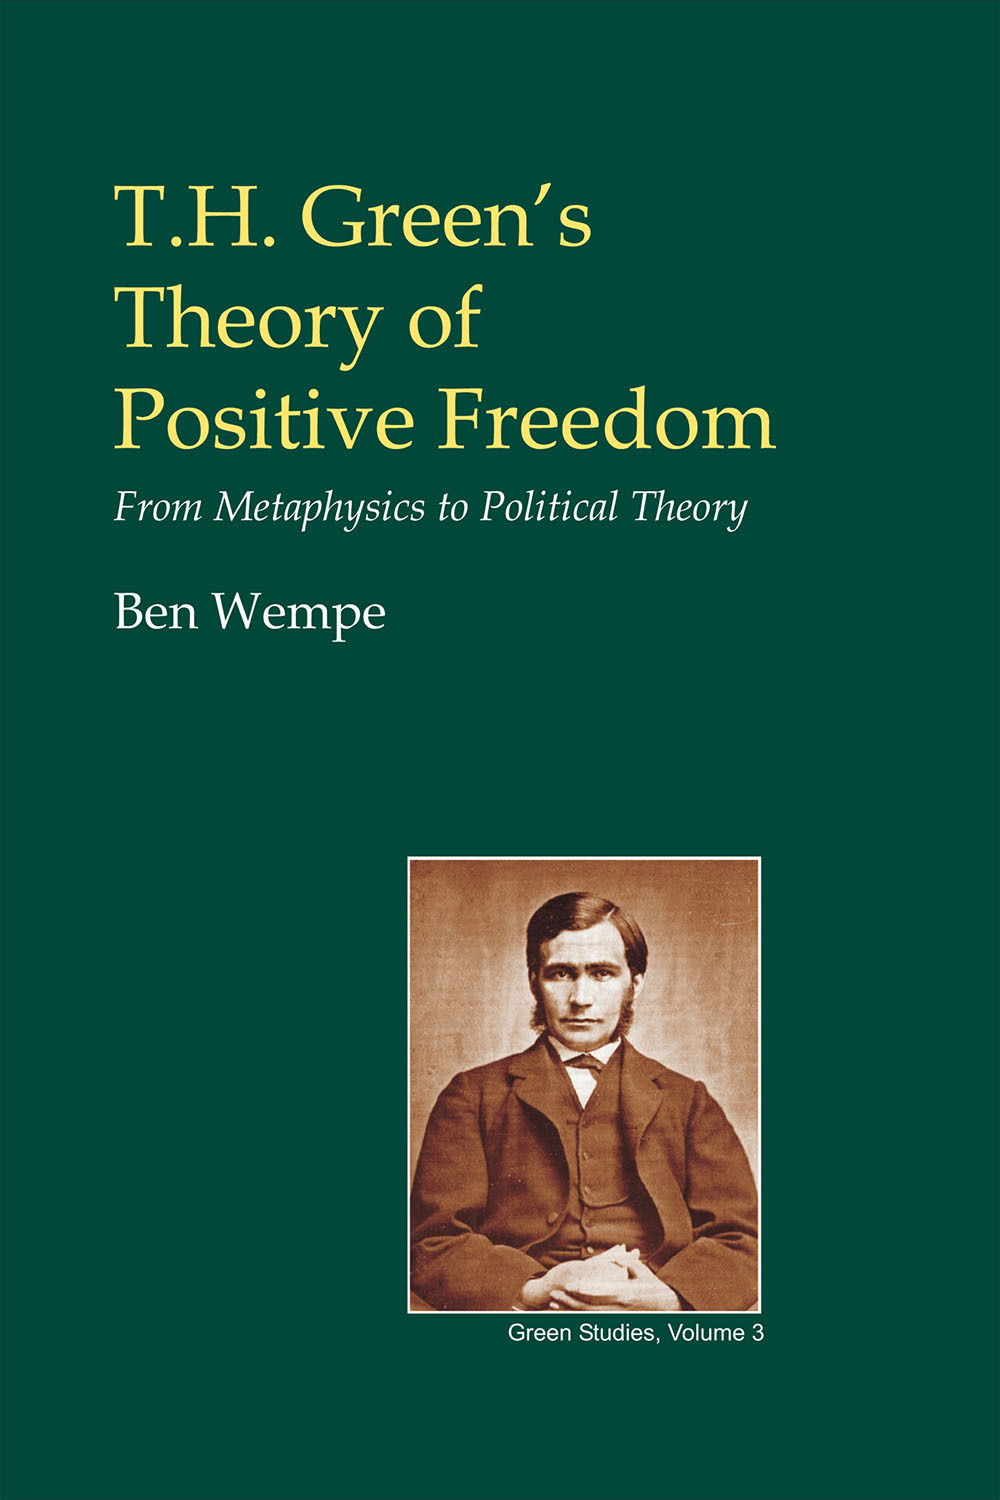 Wempe, Ben - T.H. Green's Theory of Positive Freedom, ebook